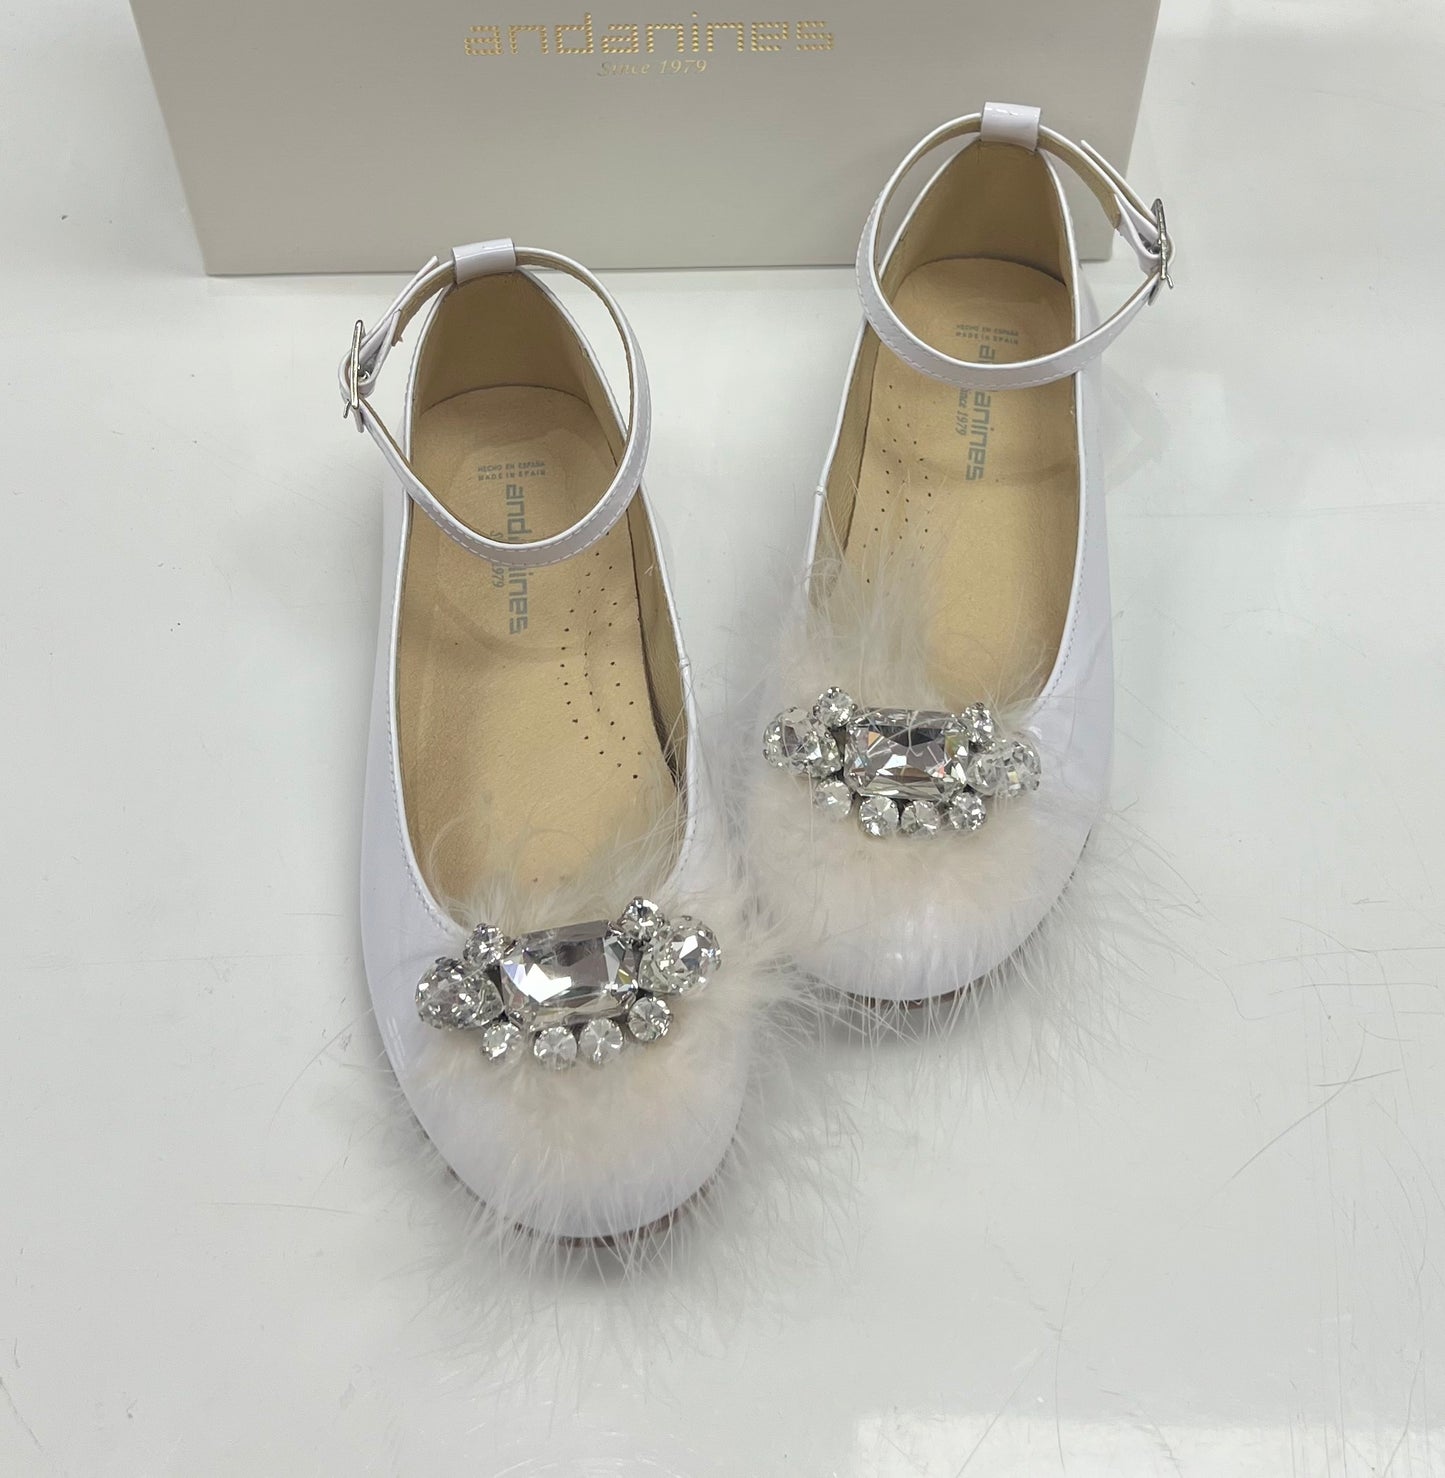 181415 Andanines White Patent Feather Jewel Shoe